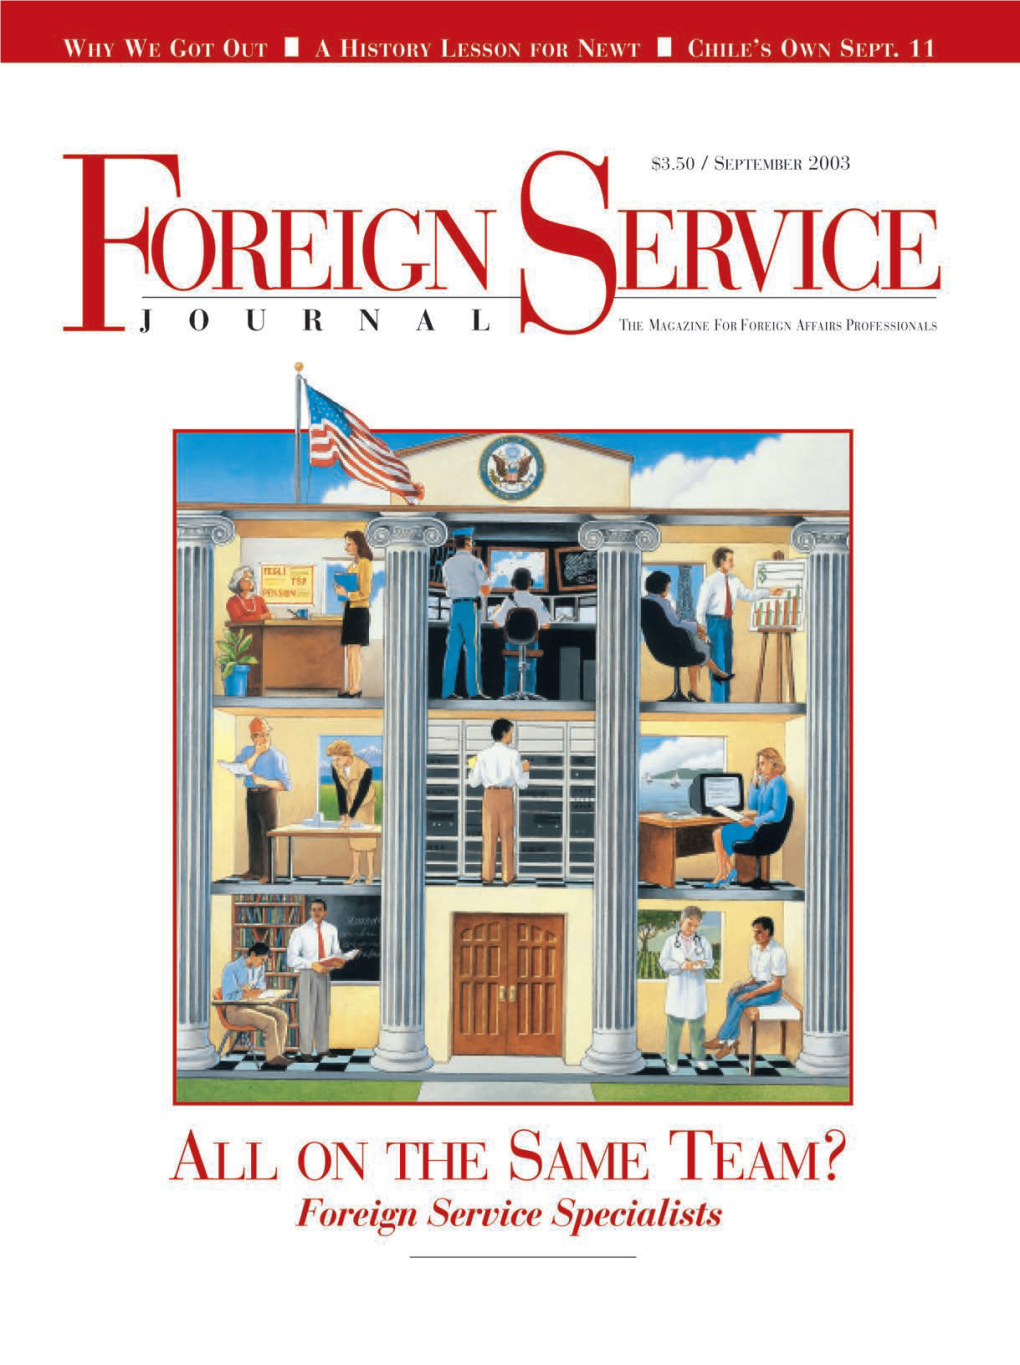 The Foreign Service Journal, September 2003.Pdf